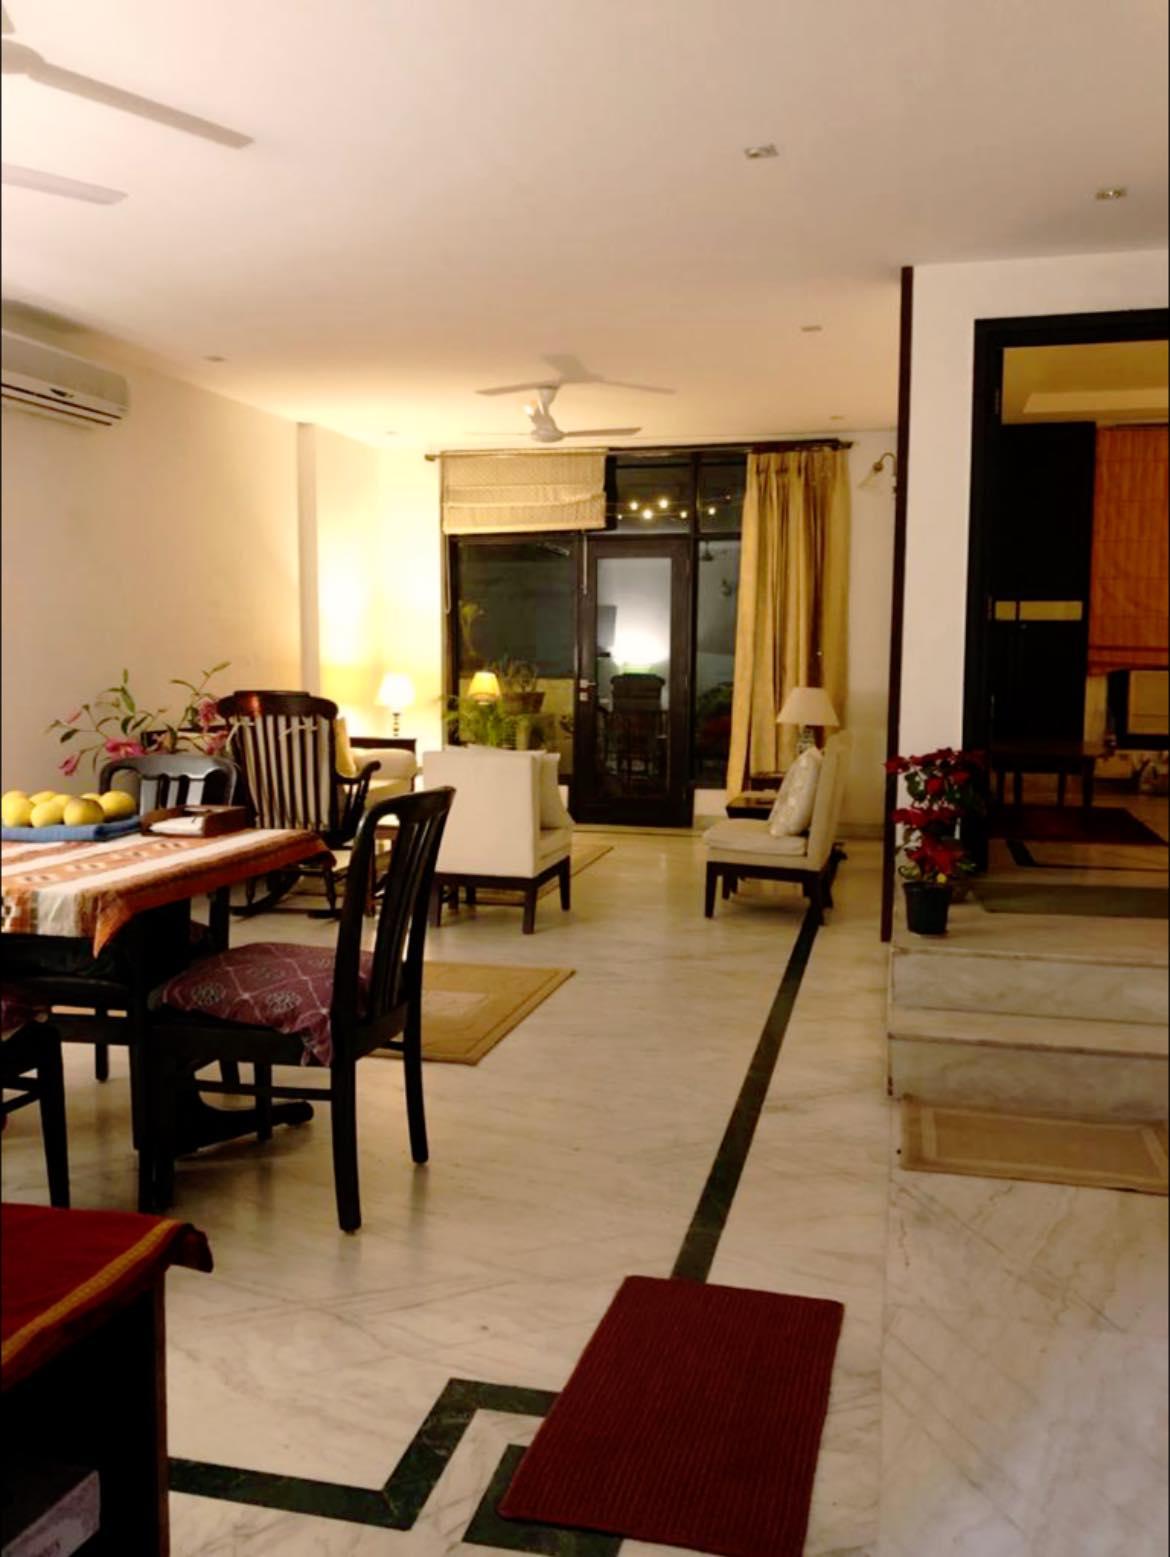 3 Bed/ 3 Bath Rent Apartment/ Flat, Furnished for rent @GREATER KAILASH NEW DELHI